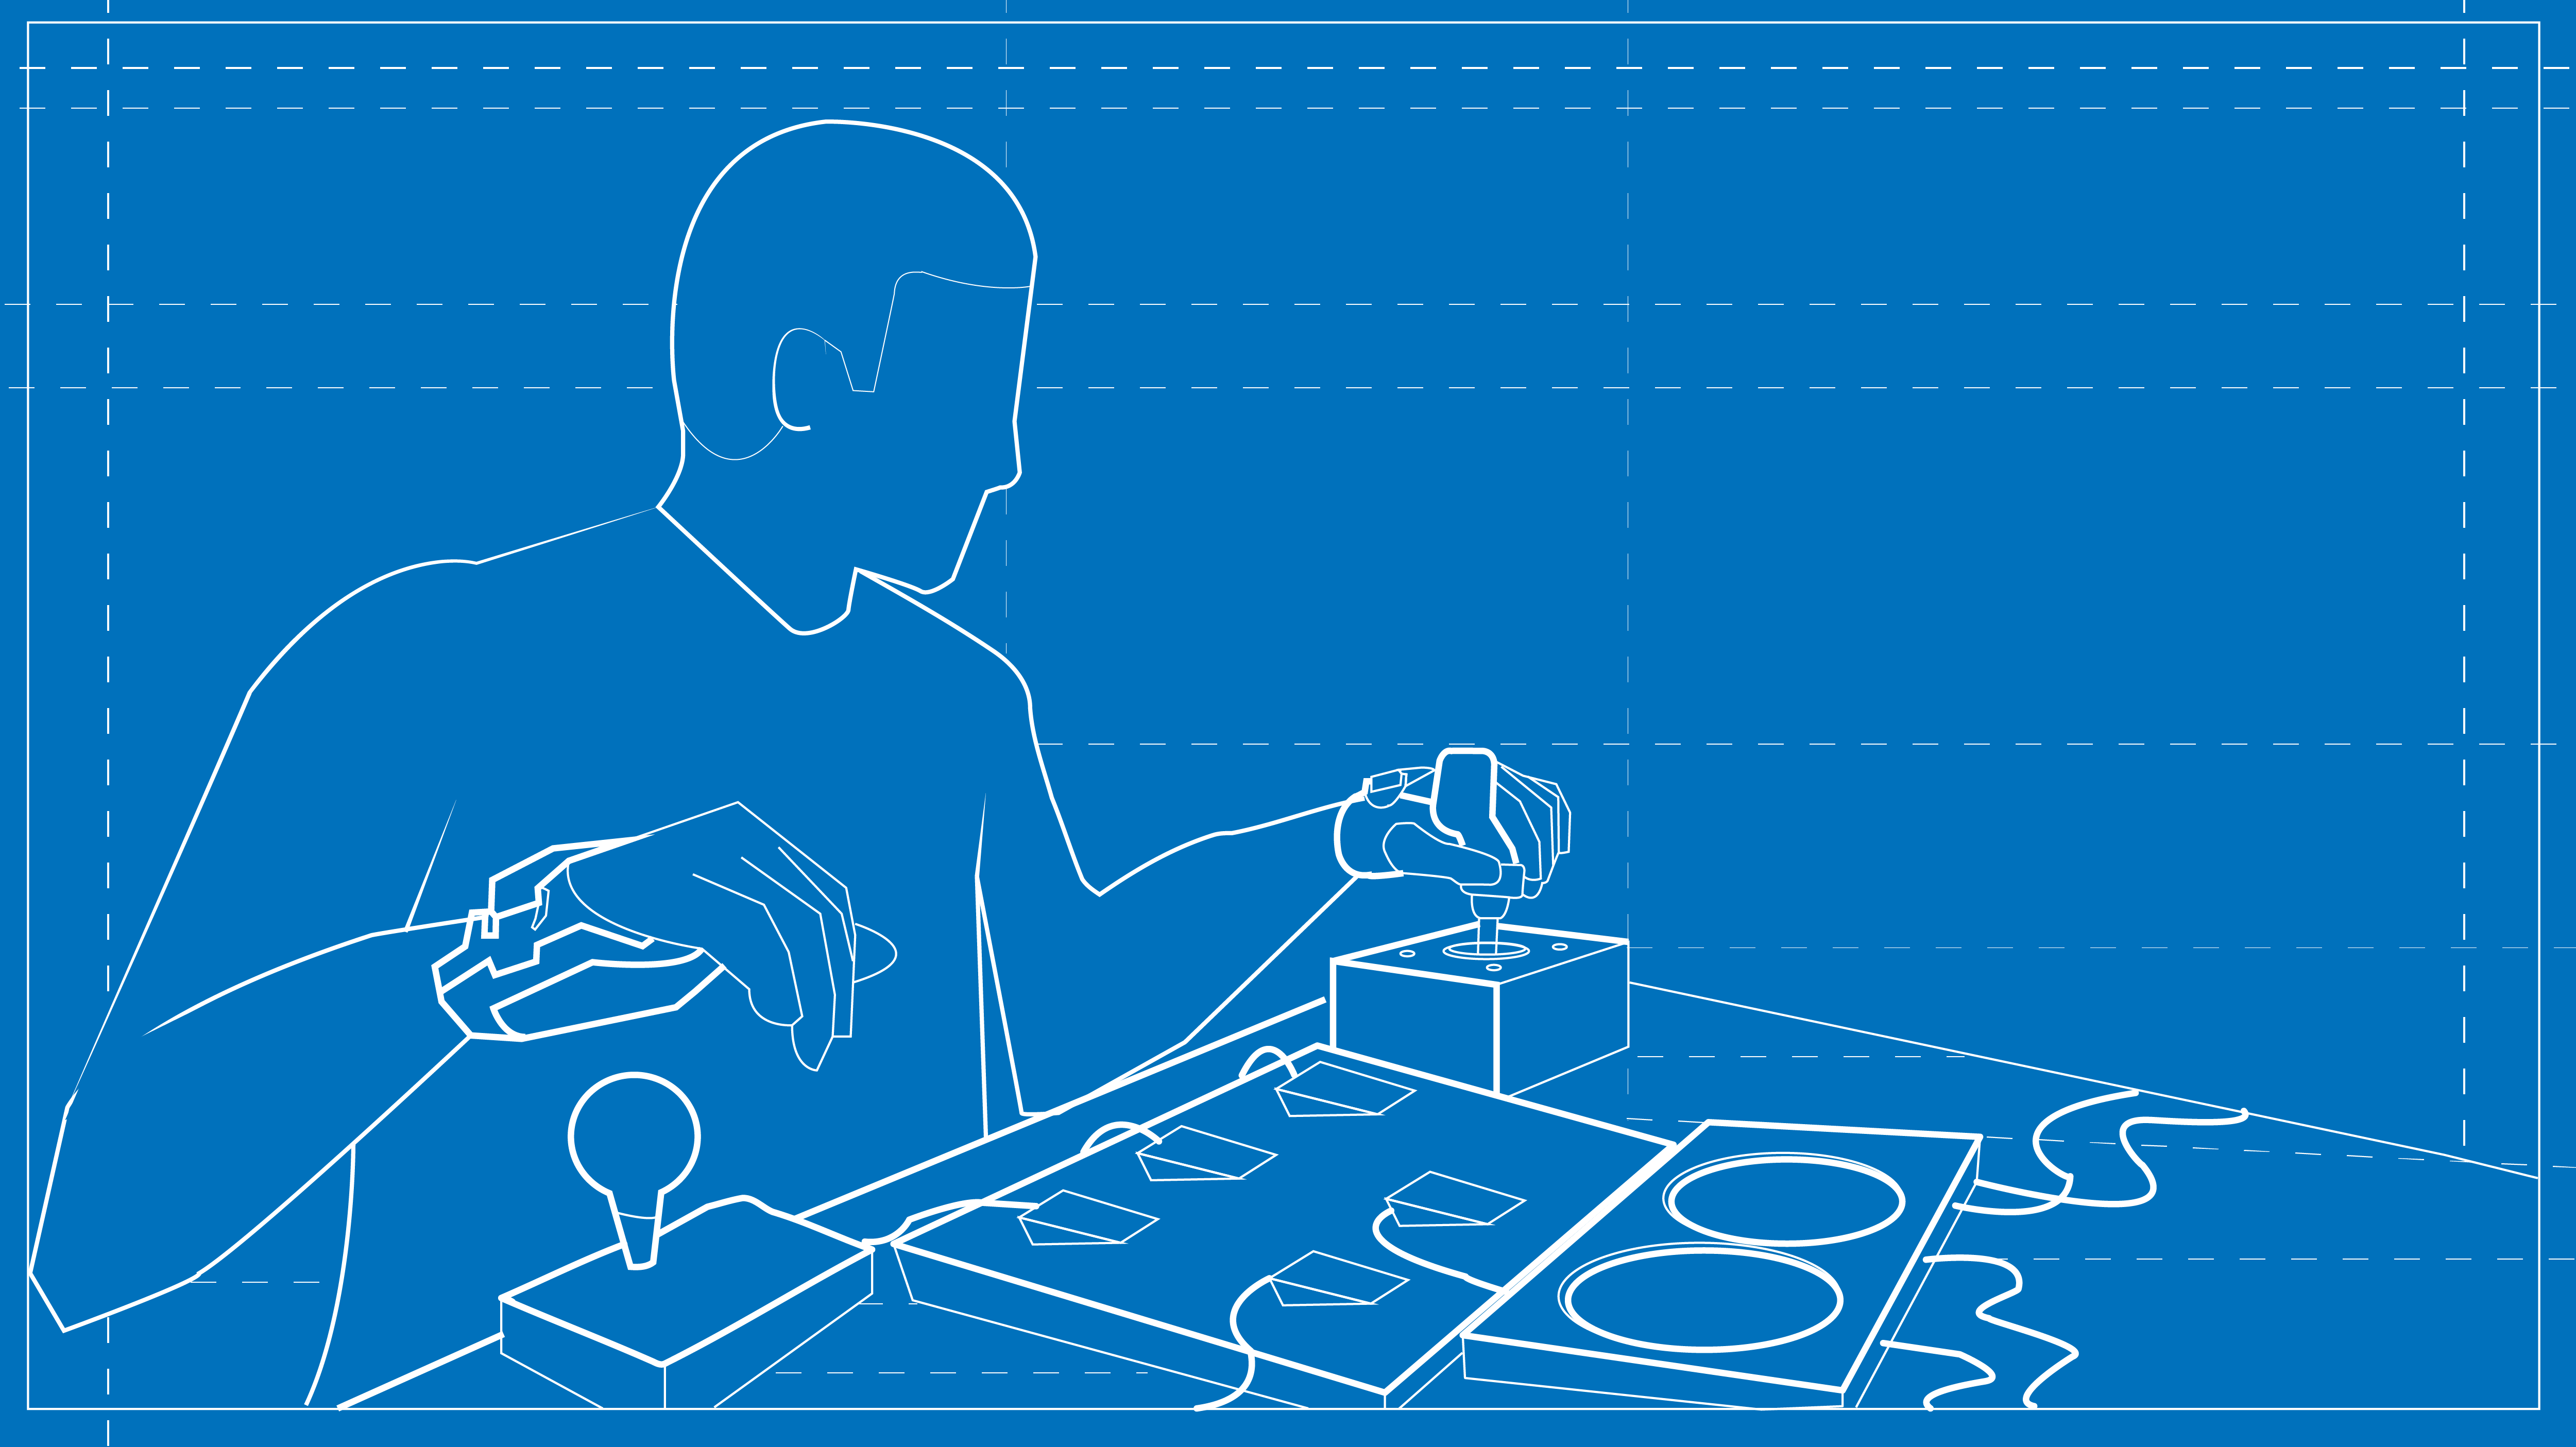 Blueprint illustration of a person using the Xbox adaptive gaming console